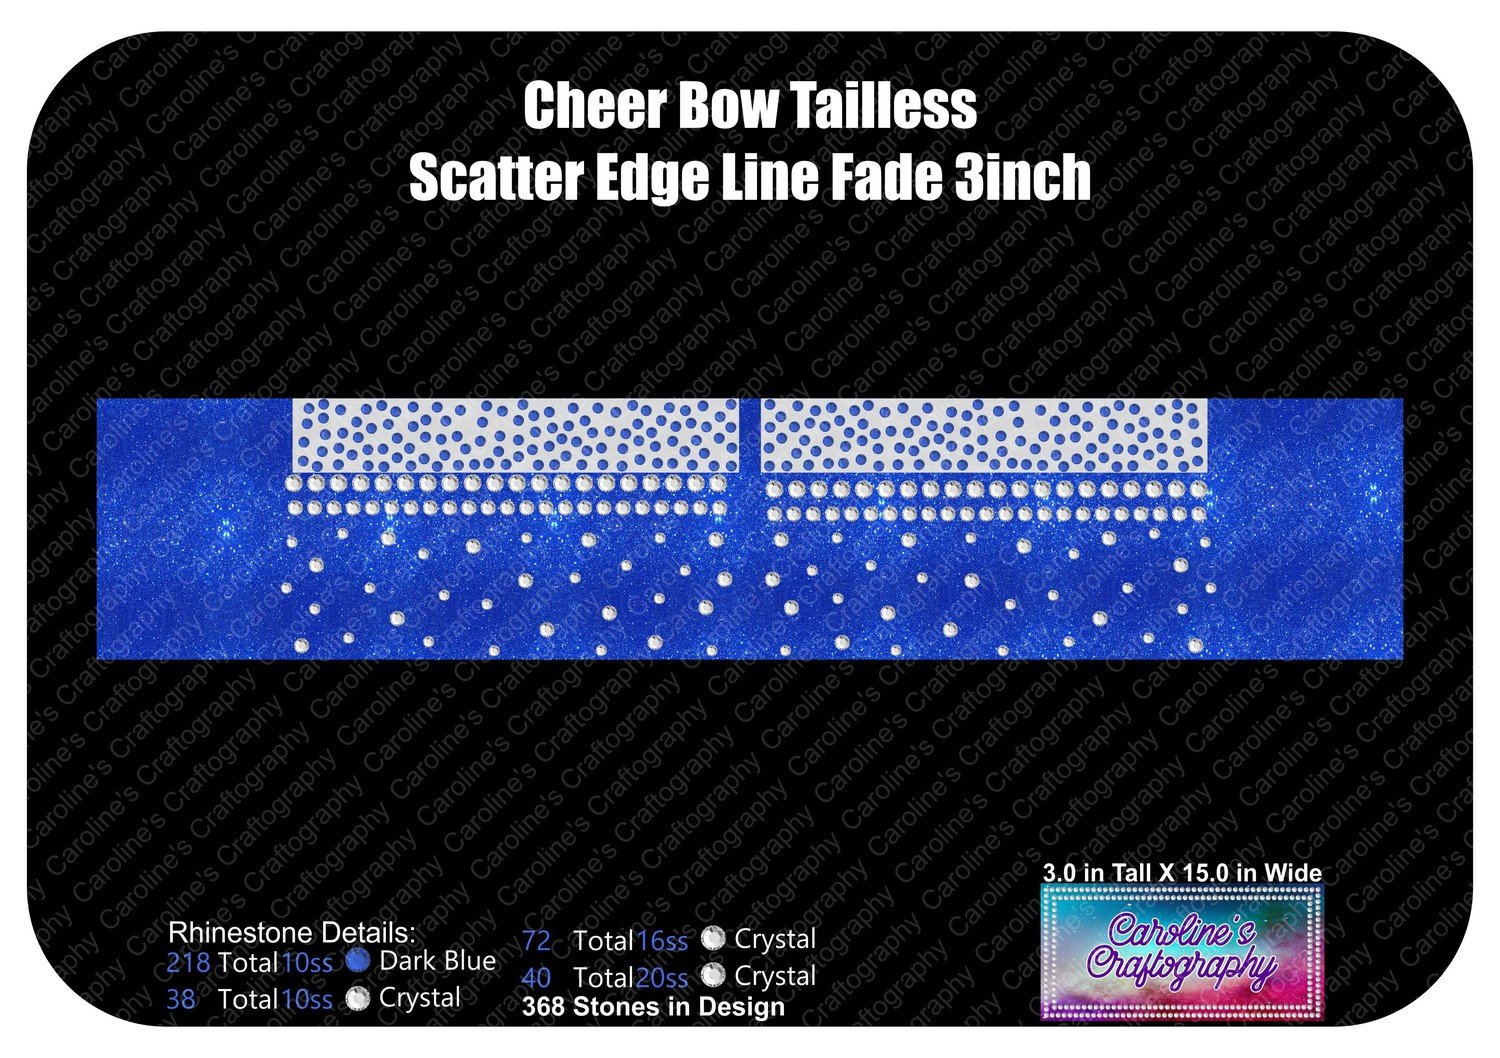 Tailless Cheer Bow Scatter Edge Line Fade 3in Stone Vinyl